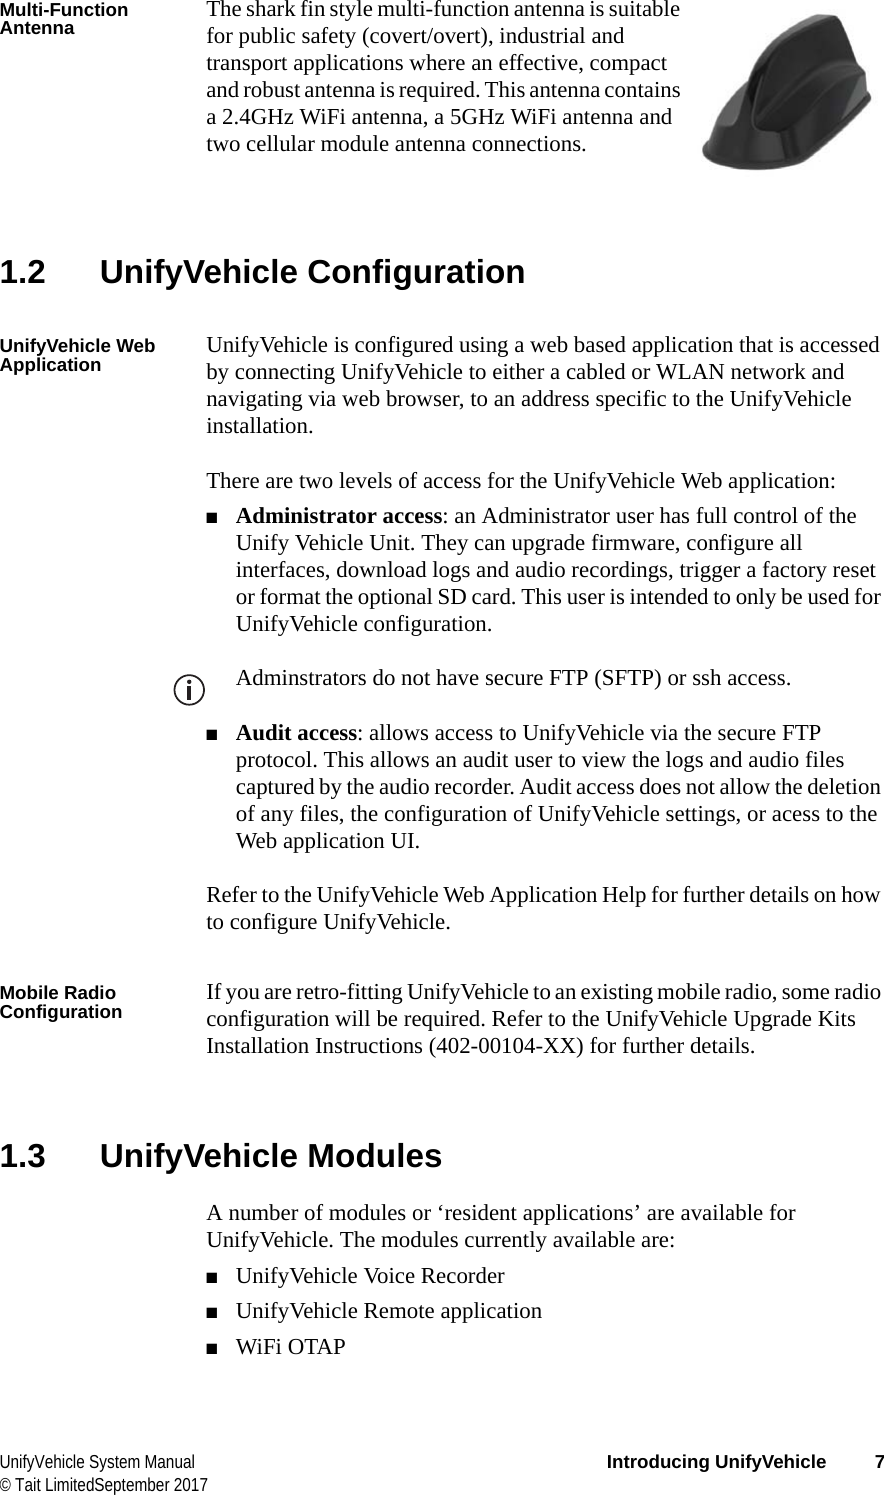  UnifyVehicle System Manual Introducing UnifyVehicle 7© Tait LimitedSeptember 2017Multi-Function Antenna The shark fin style multi-function antenna is suitable for public safety (covert/overt), industrial and transport applications where an effective, compact and robust antenna is required. This antenna contains a 2.4GHz WiFi antenna, a 5GHz WiFi antenna and two cellular module antenna connections.1.2 UnifyVehicle ConfigurationUnifyVehicle Web Application UnifyVehicle is configured using a web based application that is accessed by connecting UnifyVehicle to either a cabled or WLAN network and navigating via web browser, to an address specific to the UnifyVehicle installation.There are two levels of access for the UnifyVehicle Web application:■Administrator access: an Administrator user has full control of the Unify Vehicle Unit. They can upgrade firmware, configure all interfaces, download logs and audio recordings, trigger a factory reset or format the optional SD card. This user is intended to only be used for UnifyVehicle configuration.Adminstrators do not have secure FTP (SFTP) or ssh access.■Audit access: allows access to UnifyVehicle via the secure FTP protocol. This allows an audit user to view the logs and audio files captured by the audio recorder. Audit access does not allow the deletion of any files, the configuration of UnifyVehicle settings, or acess to the Web application UI.Refer to the UnifyVehicle Web Application Help for further details on how to configure UnifyVehicle.Mobile Radio Configuration If you are retro-fitting UnifyVehicle to an existing mobile radio, some radio configuration will be required. Refer to the UnifyVehicle Upgrade Kits Installation Instructions (402-00104-XX) for further details.1.3 UnifyVehicle ModulesA number of modules or ‘resident applications’ are available for UnifyVehicle. The modules currently available are:■UnifyVehicle Voice Recorder■UnifyVehicle Remote application■WiFi OTAP